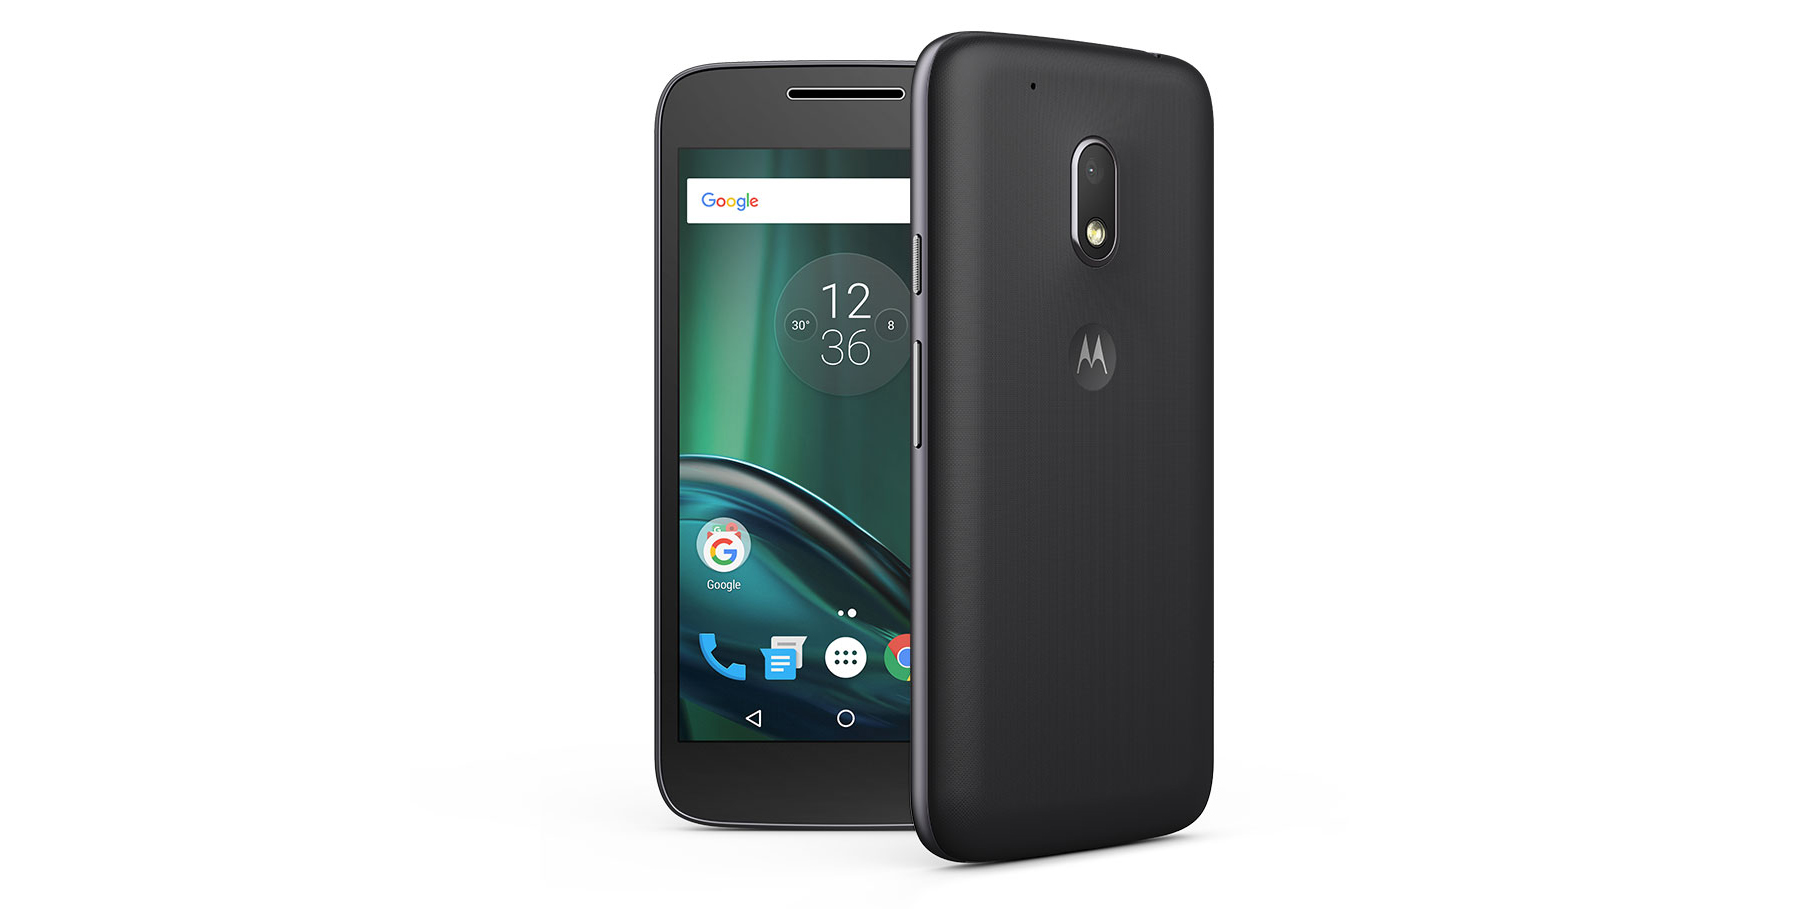 Pick up the Moto G Play 16GB Android Smartphone in unlocked condition without ads for $130 ...